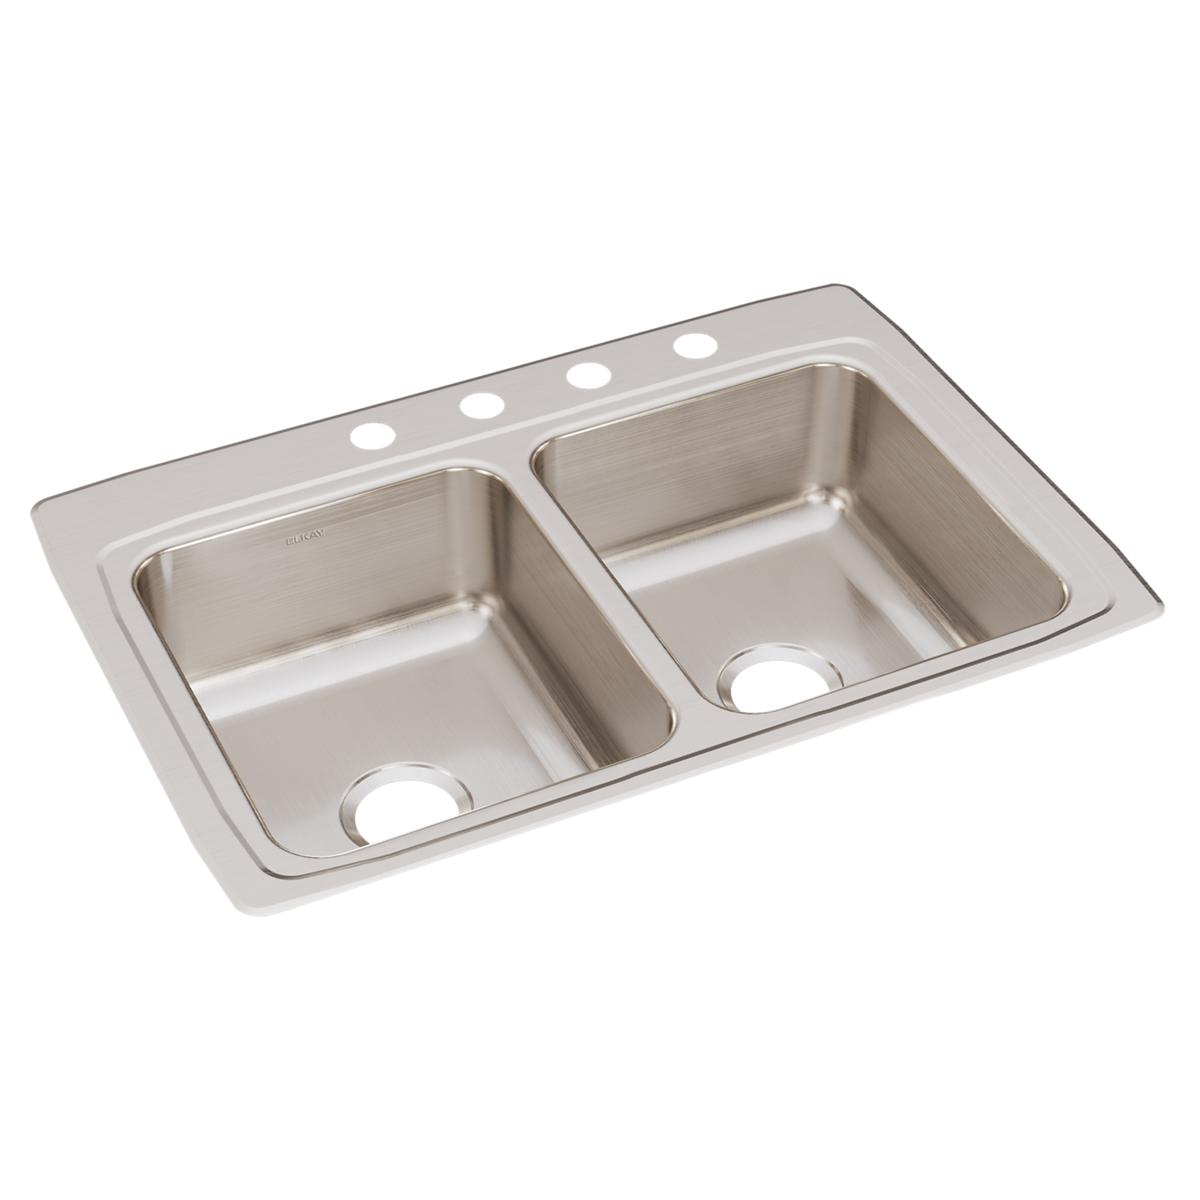 Elkay Lustertone Classic 33" x 22" x 8-1/8" Equal Double Bowl Drop-in Sink with Quick-clip